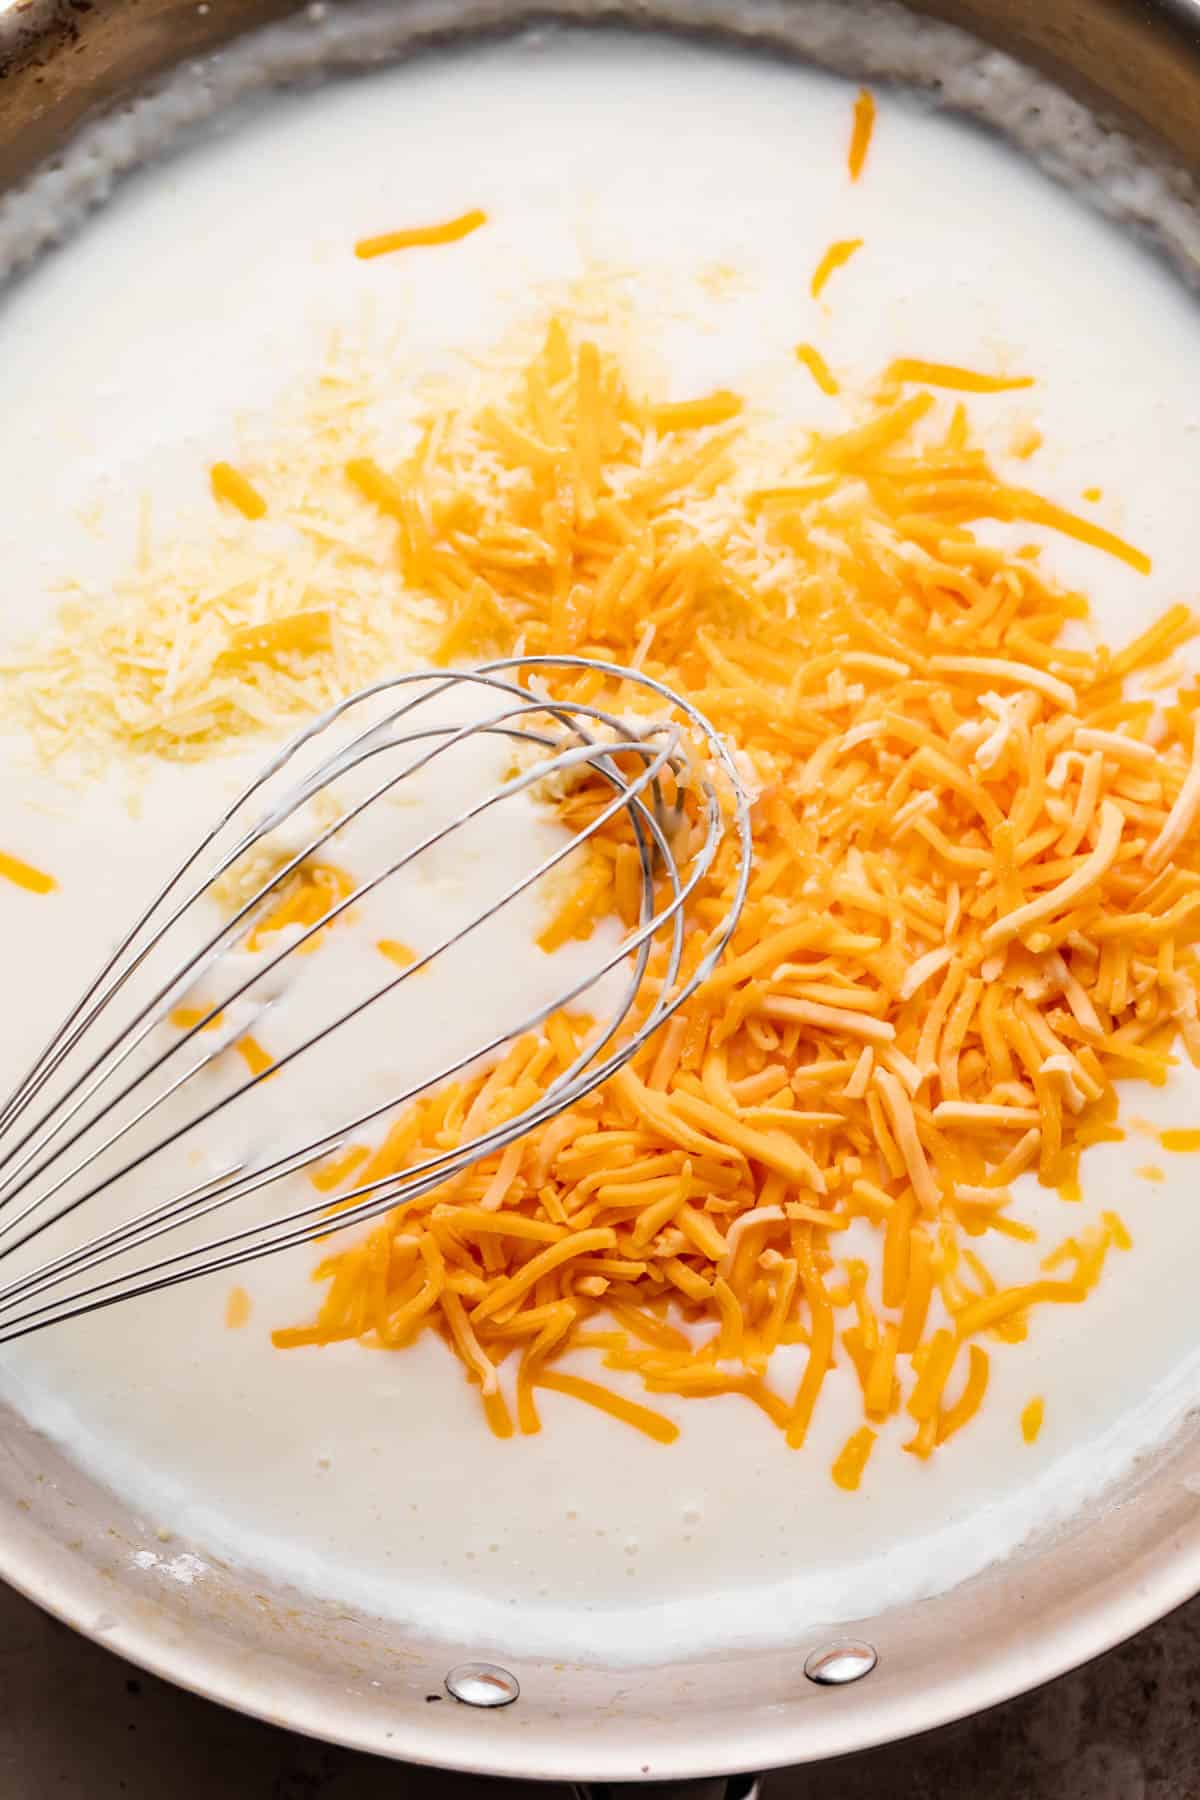 whisking shredded cheddar cheese with milk.